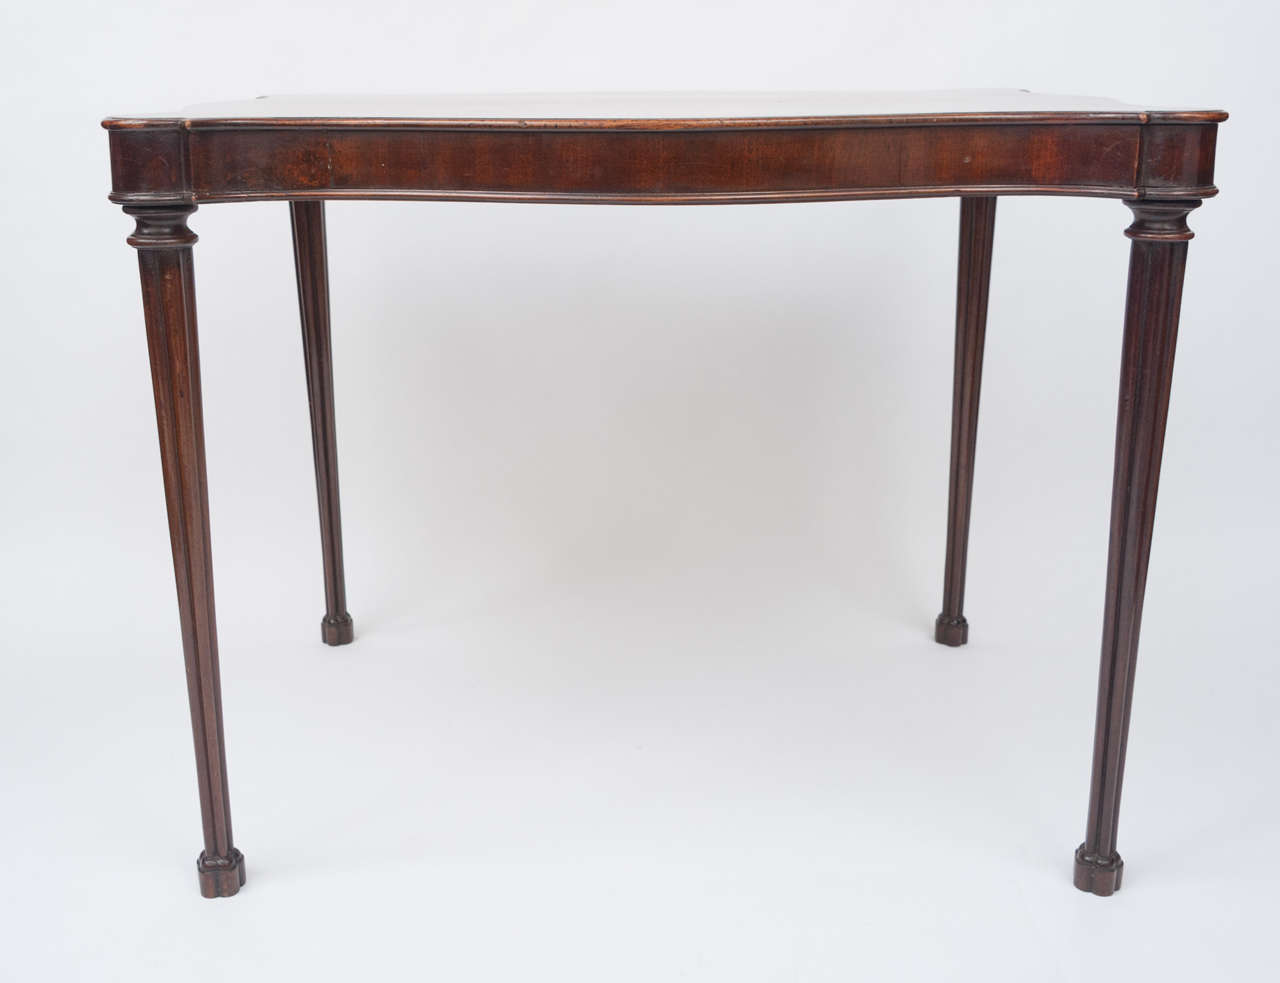 A Geo III mahogany silver table of unusual serpentine form, the moulded top above a crossbanded frieze. Raised on very elegant cluster-column legs with cinquefoil block feet.